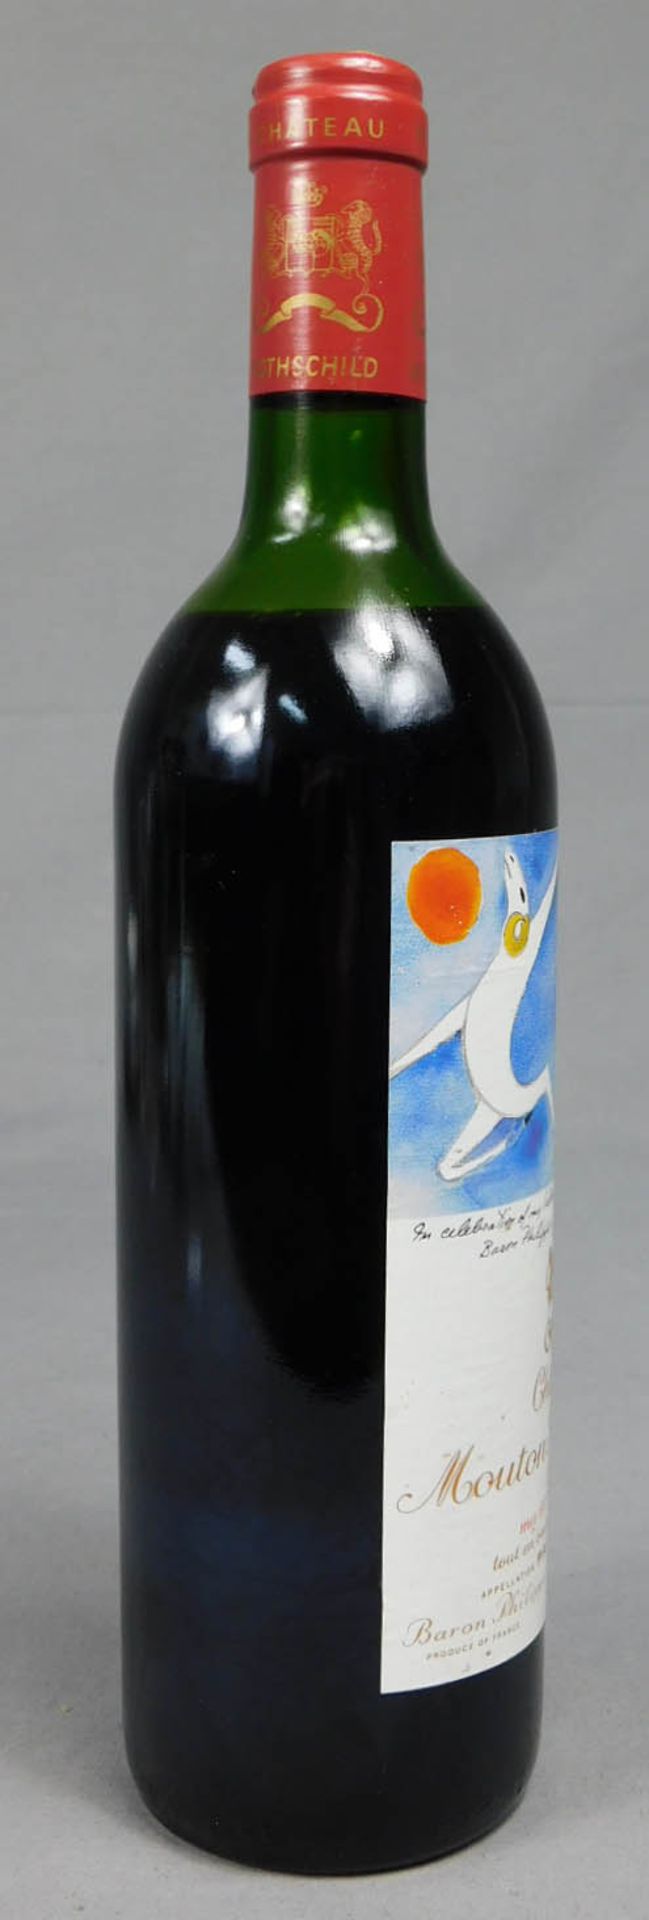 1982 Chateau Mouton Rothschild. 1 ganze Flasche. - Image 3 of 6